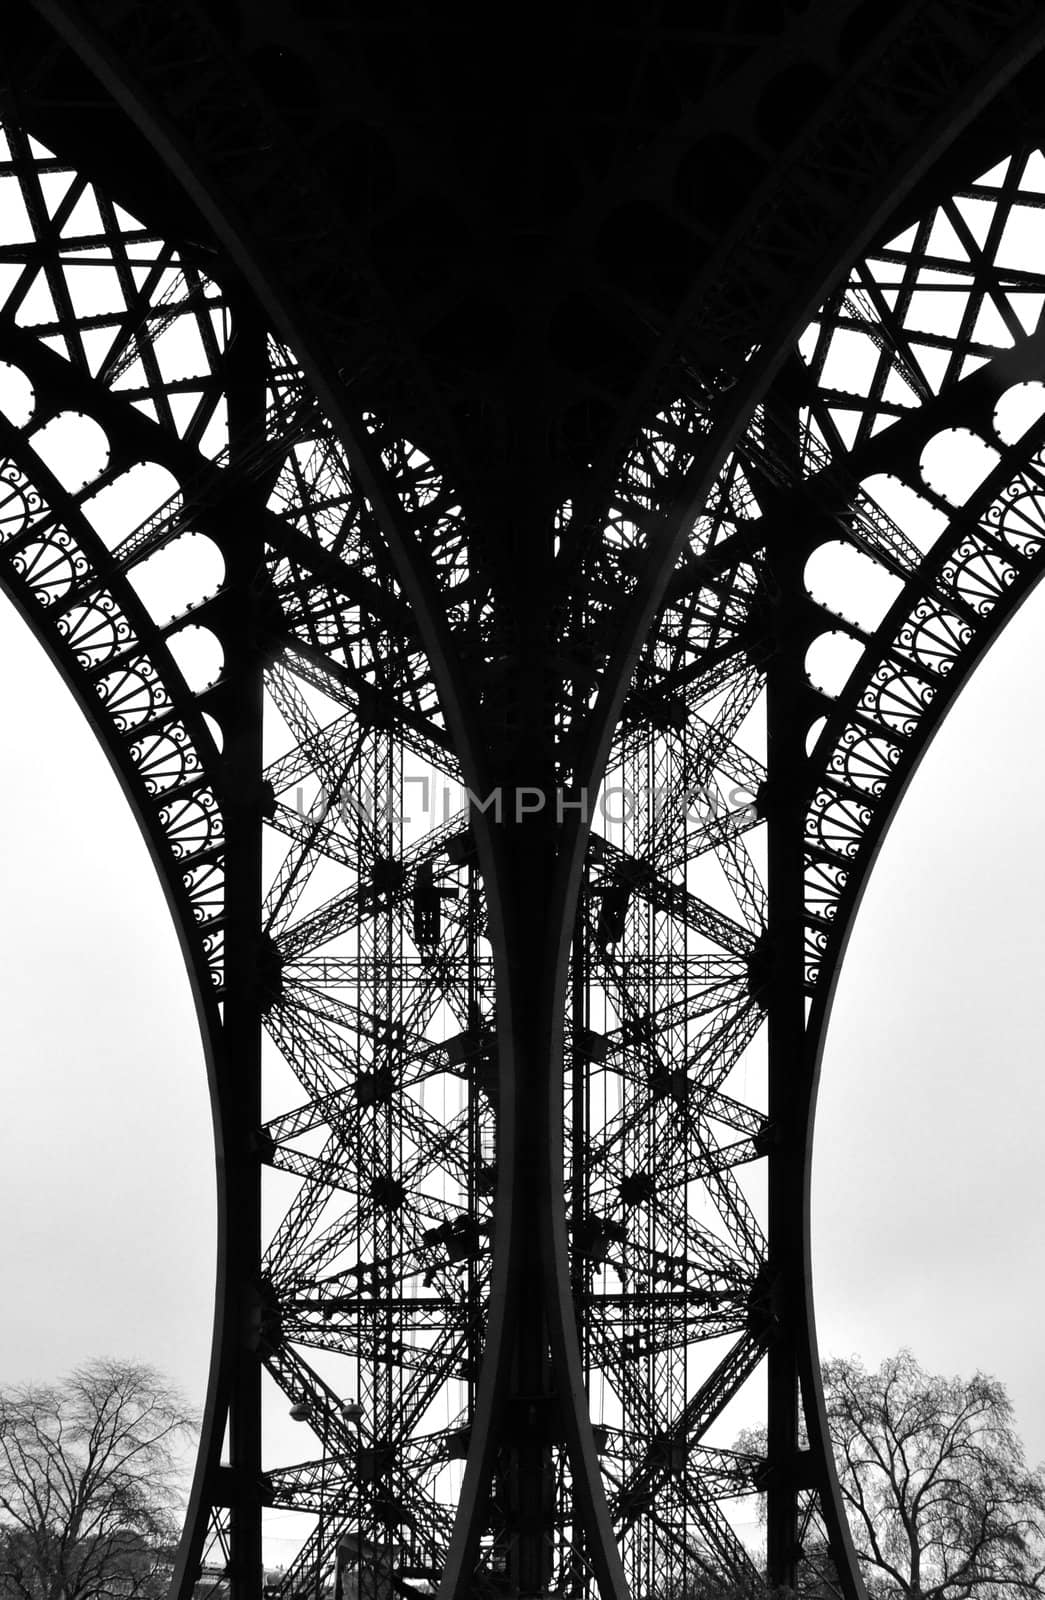 Paris - France Eiffel Tower. Close view of the steel.